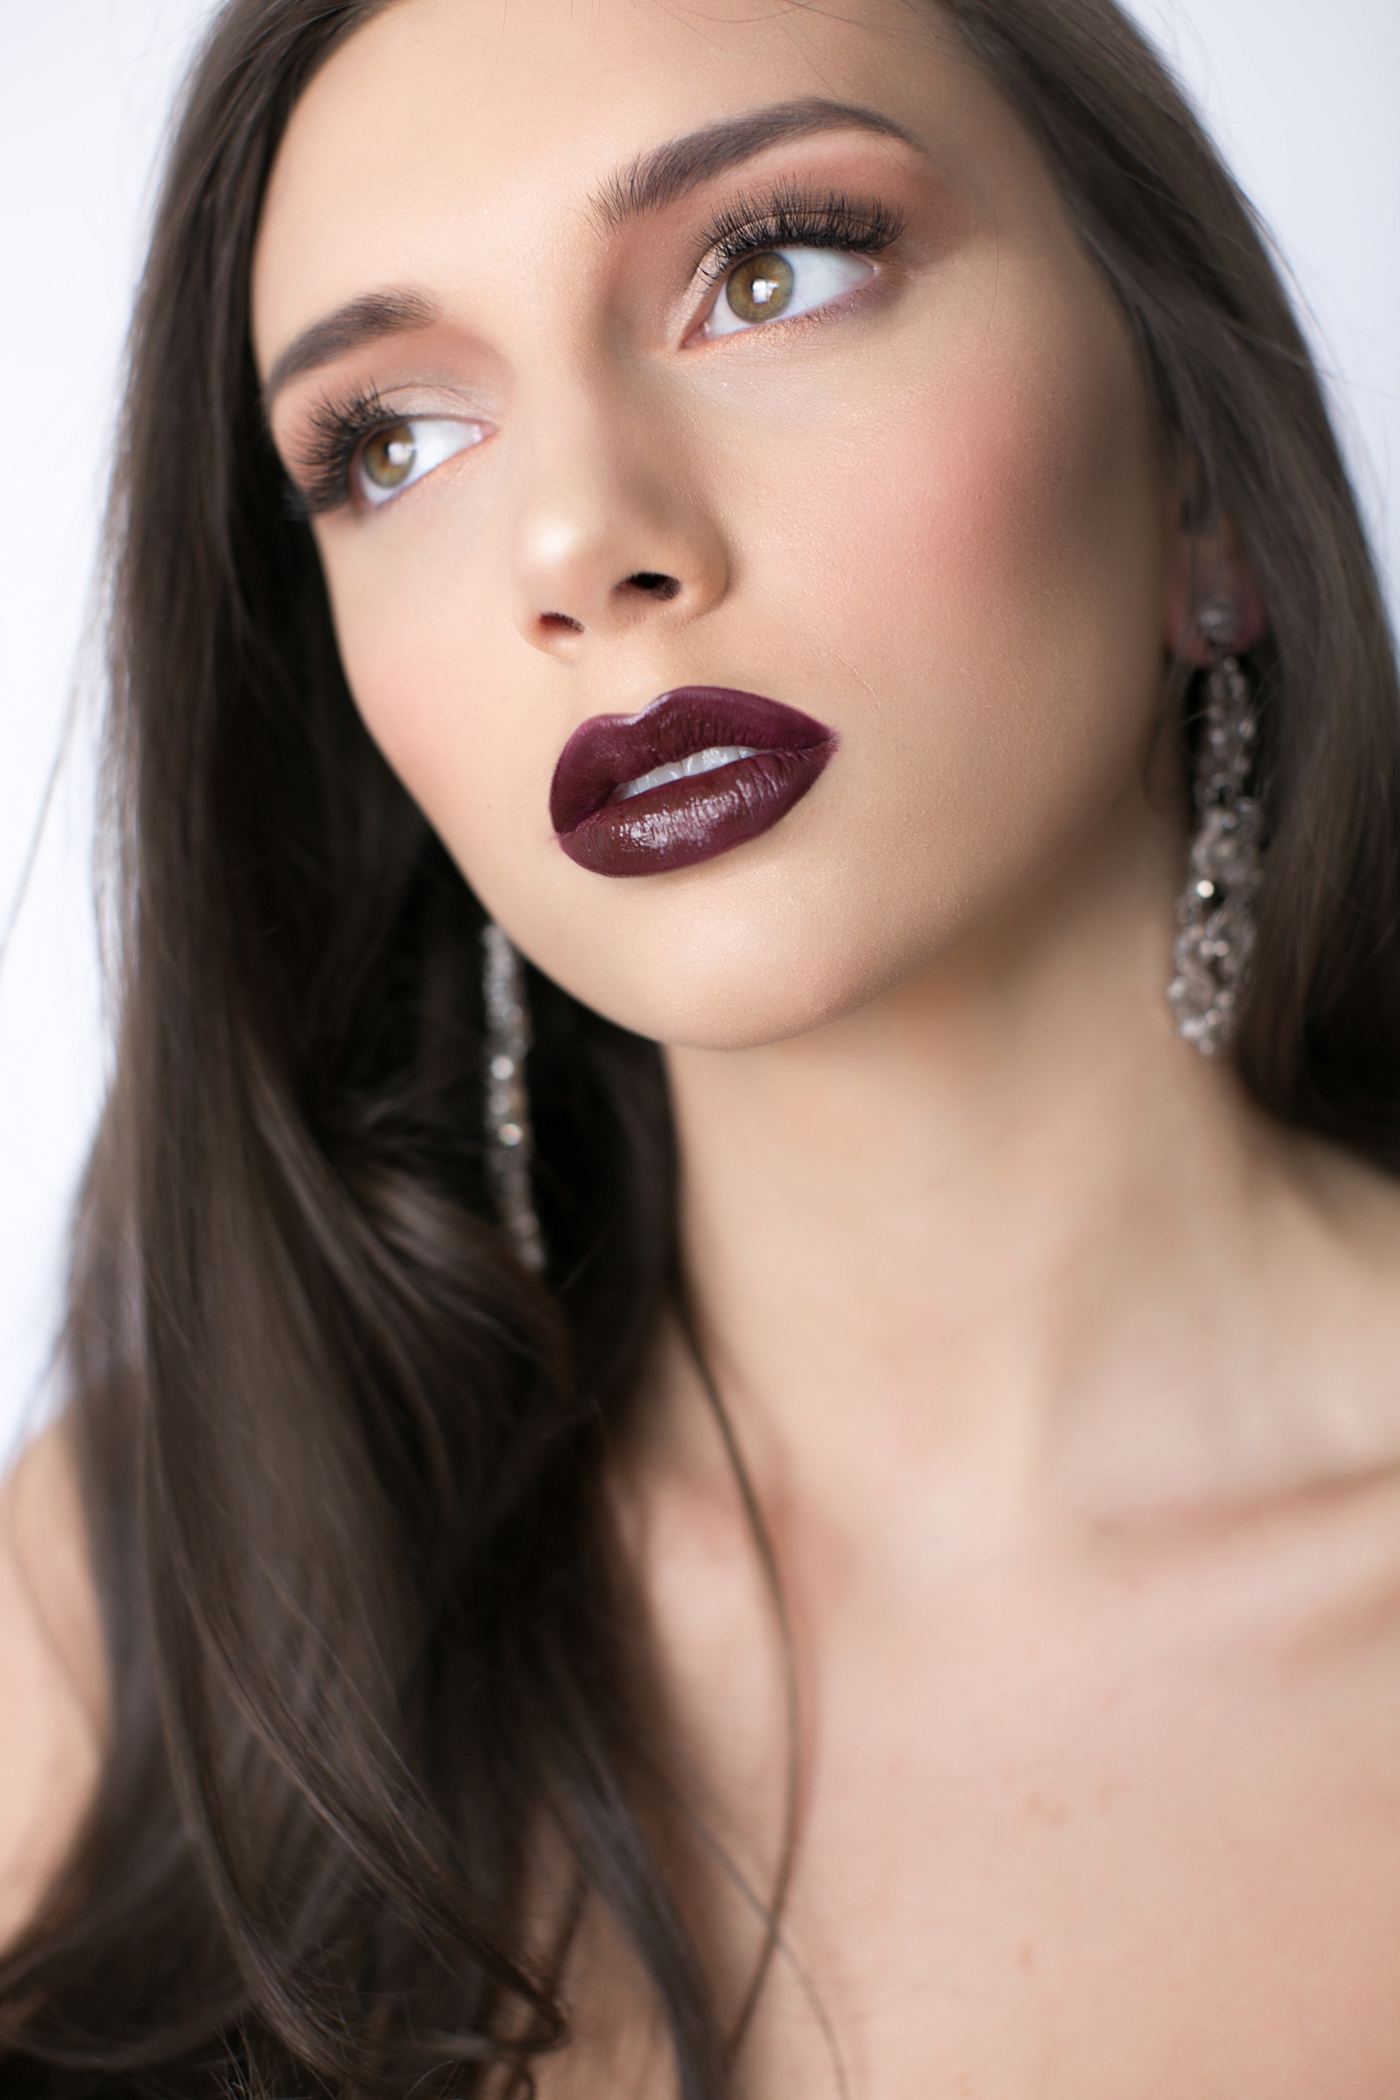 beauty photographers | dallas photographers | southern commercial photographers